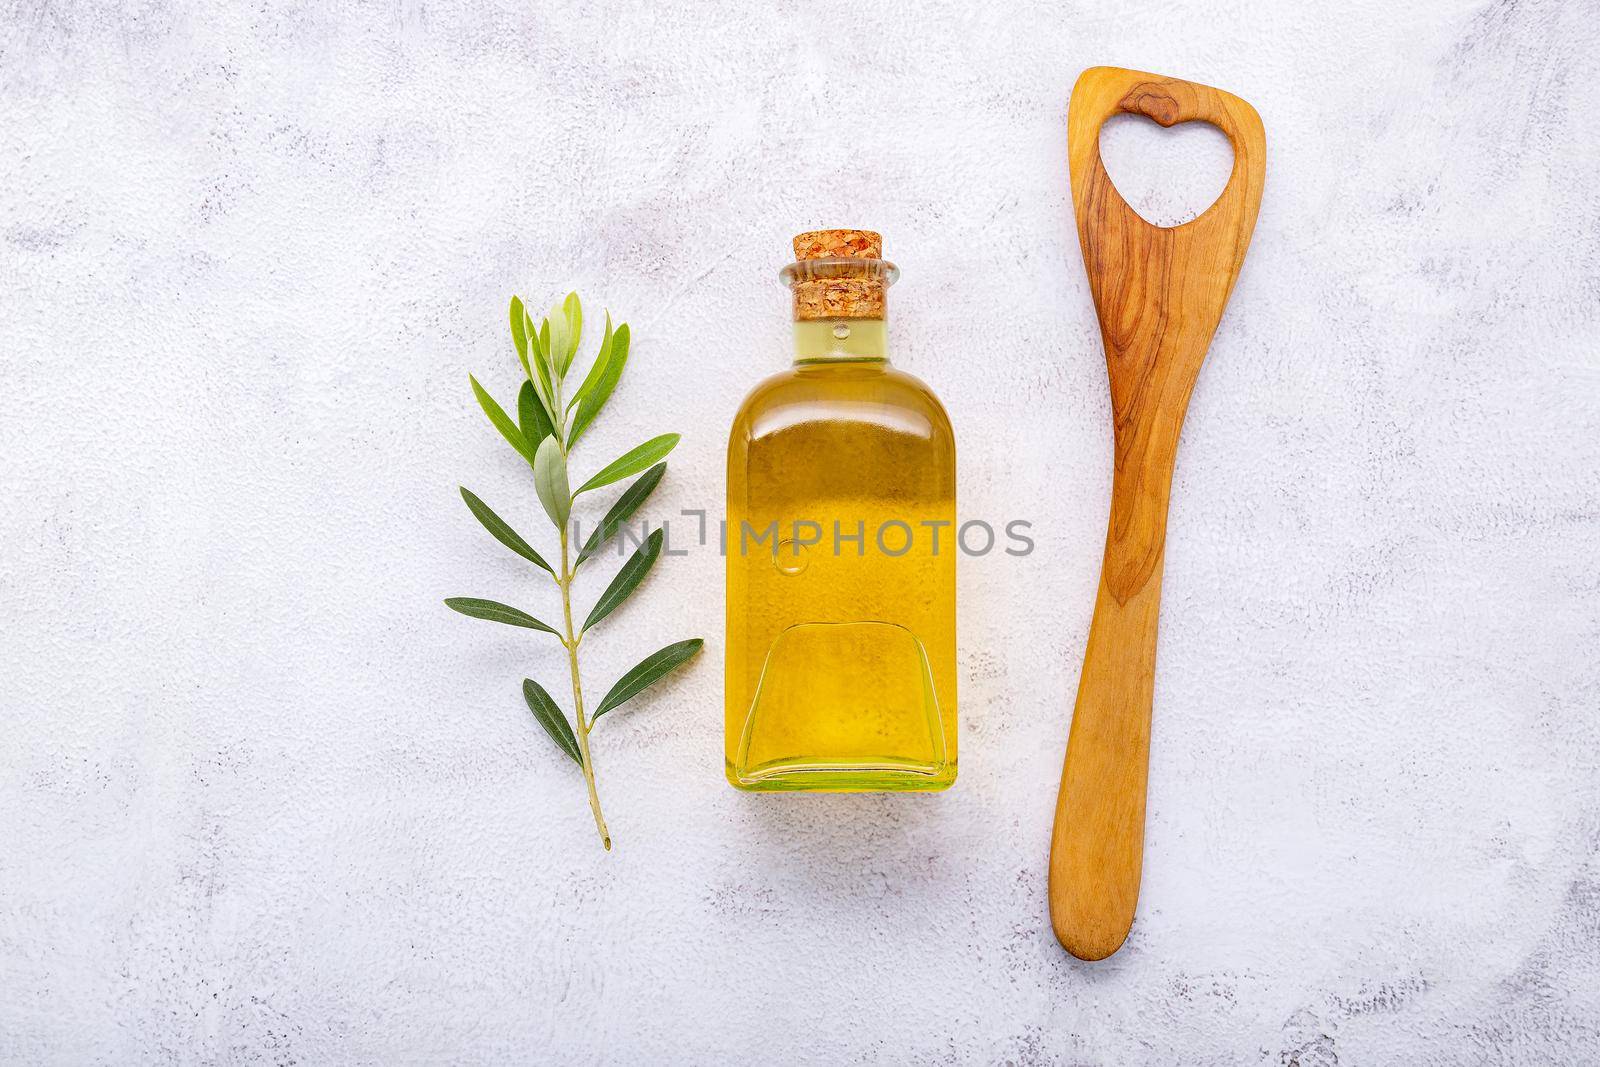 Glass bottle of olive oil and olive branch set up on white concrete background.